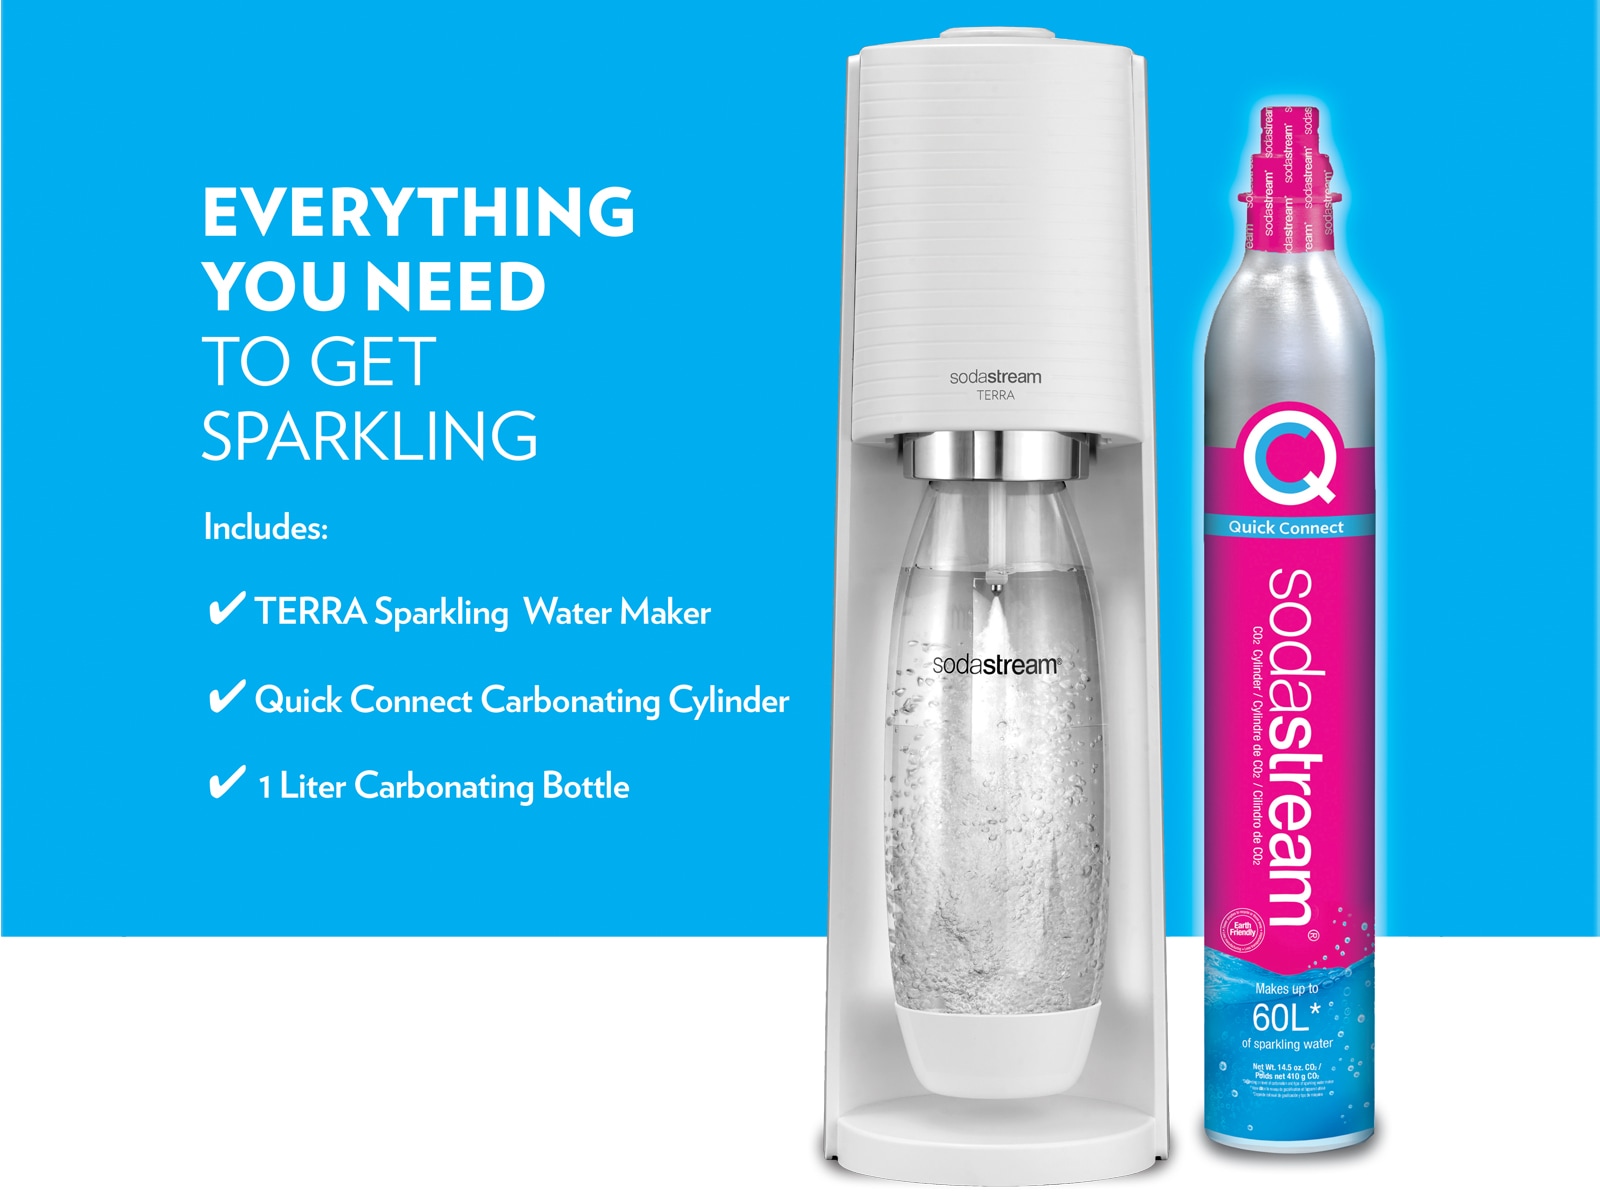 The next generation of Sparkling Water Makers is recently launched